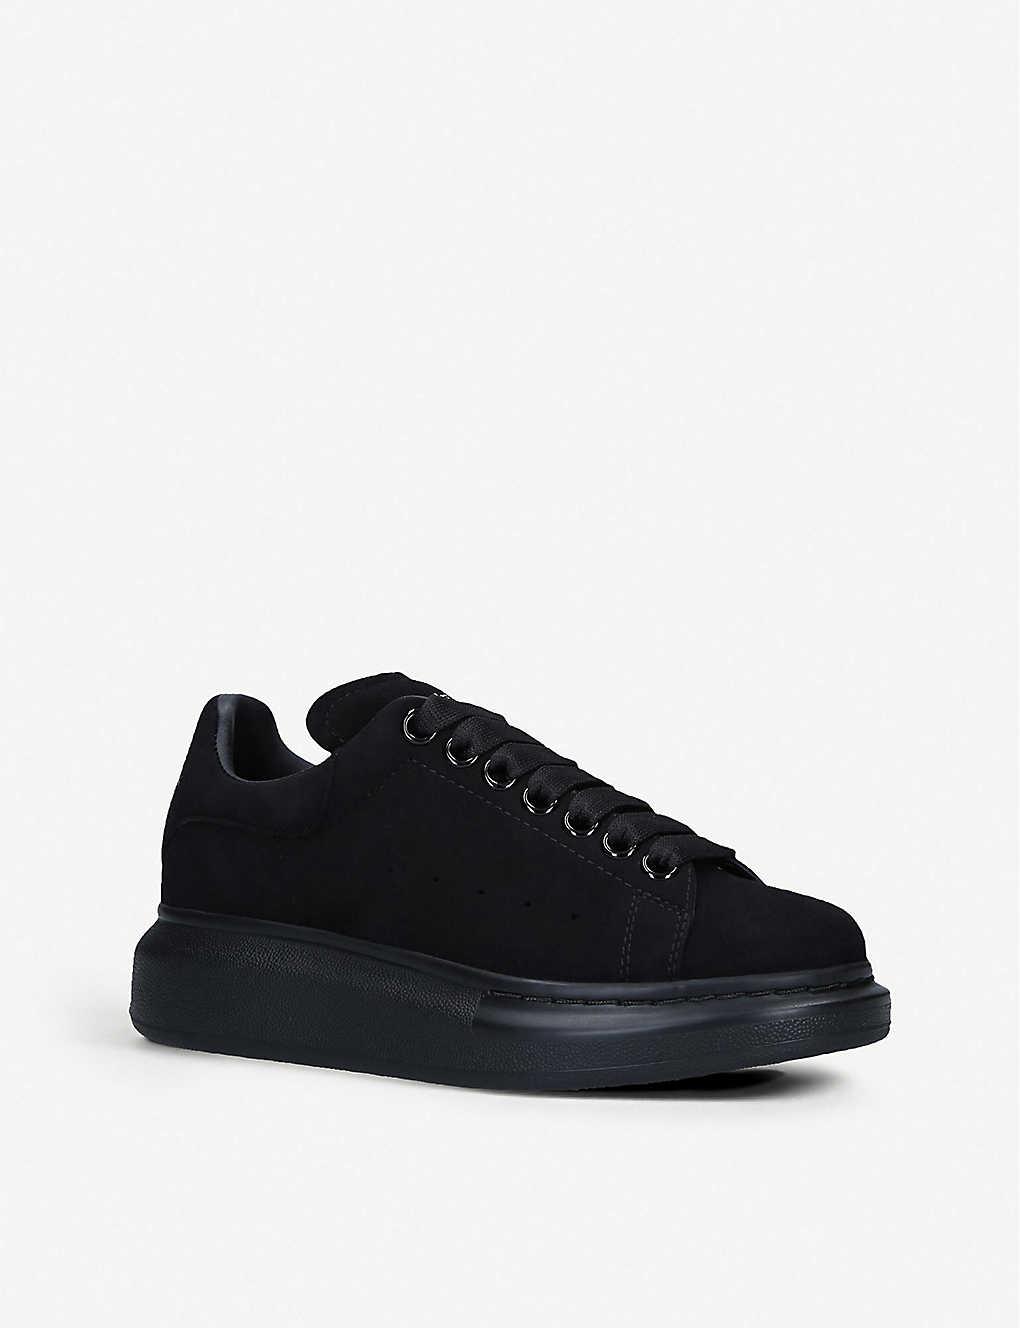 Alexander McQueen Runway Leather And Suede Platform Trainers in White ...